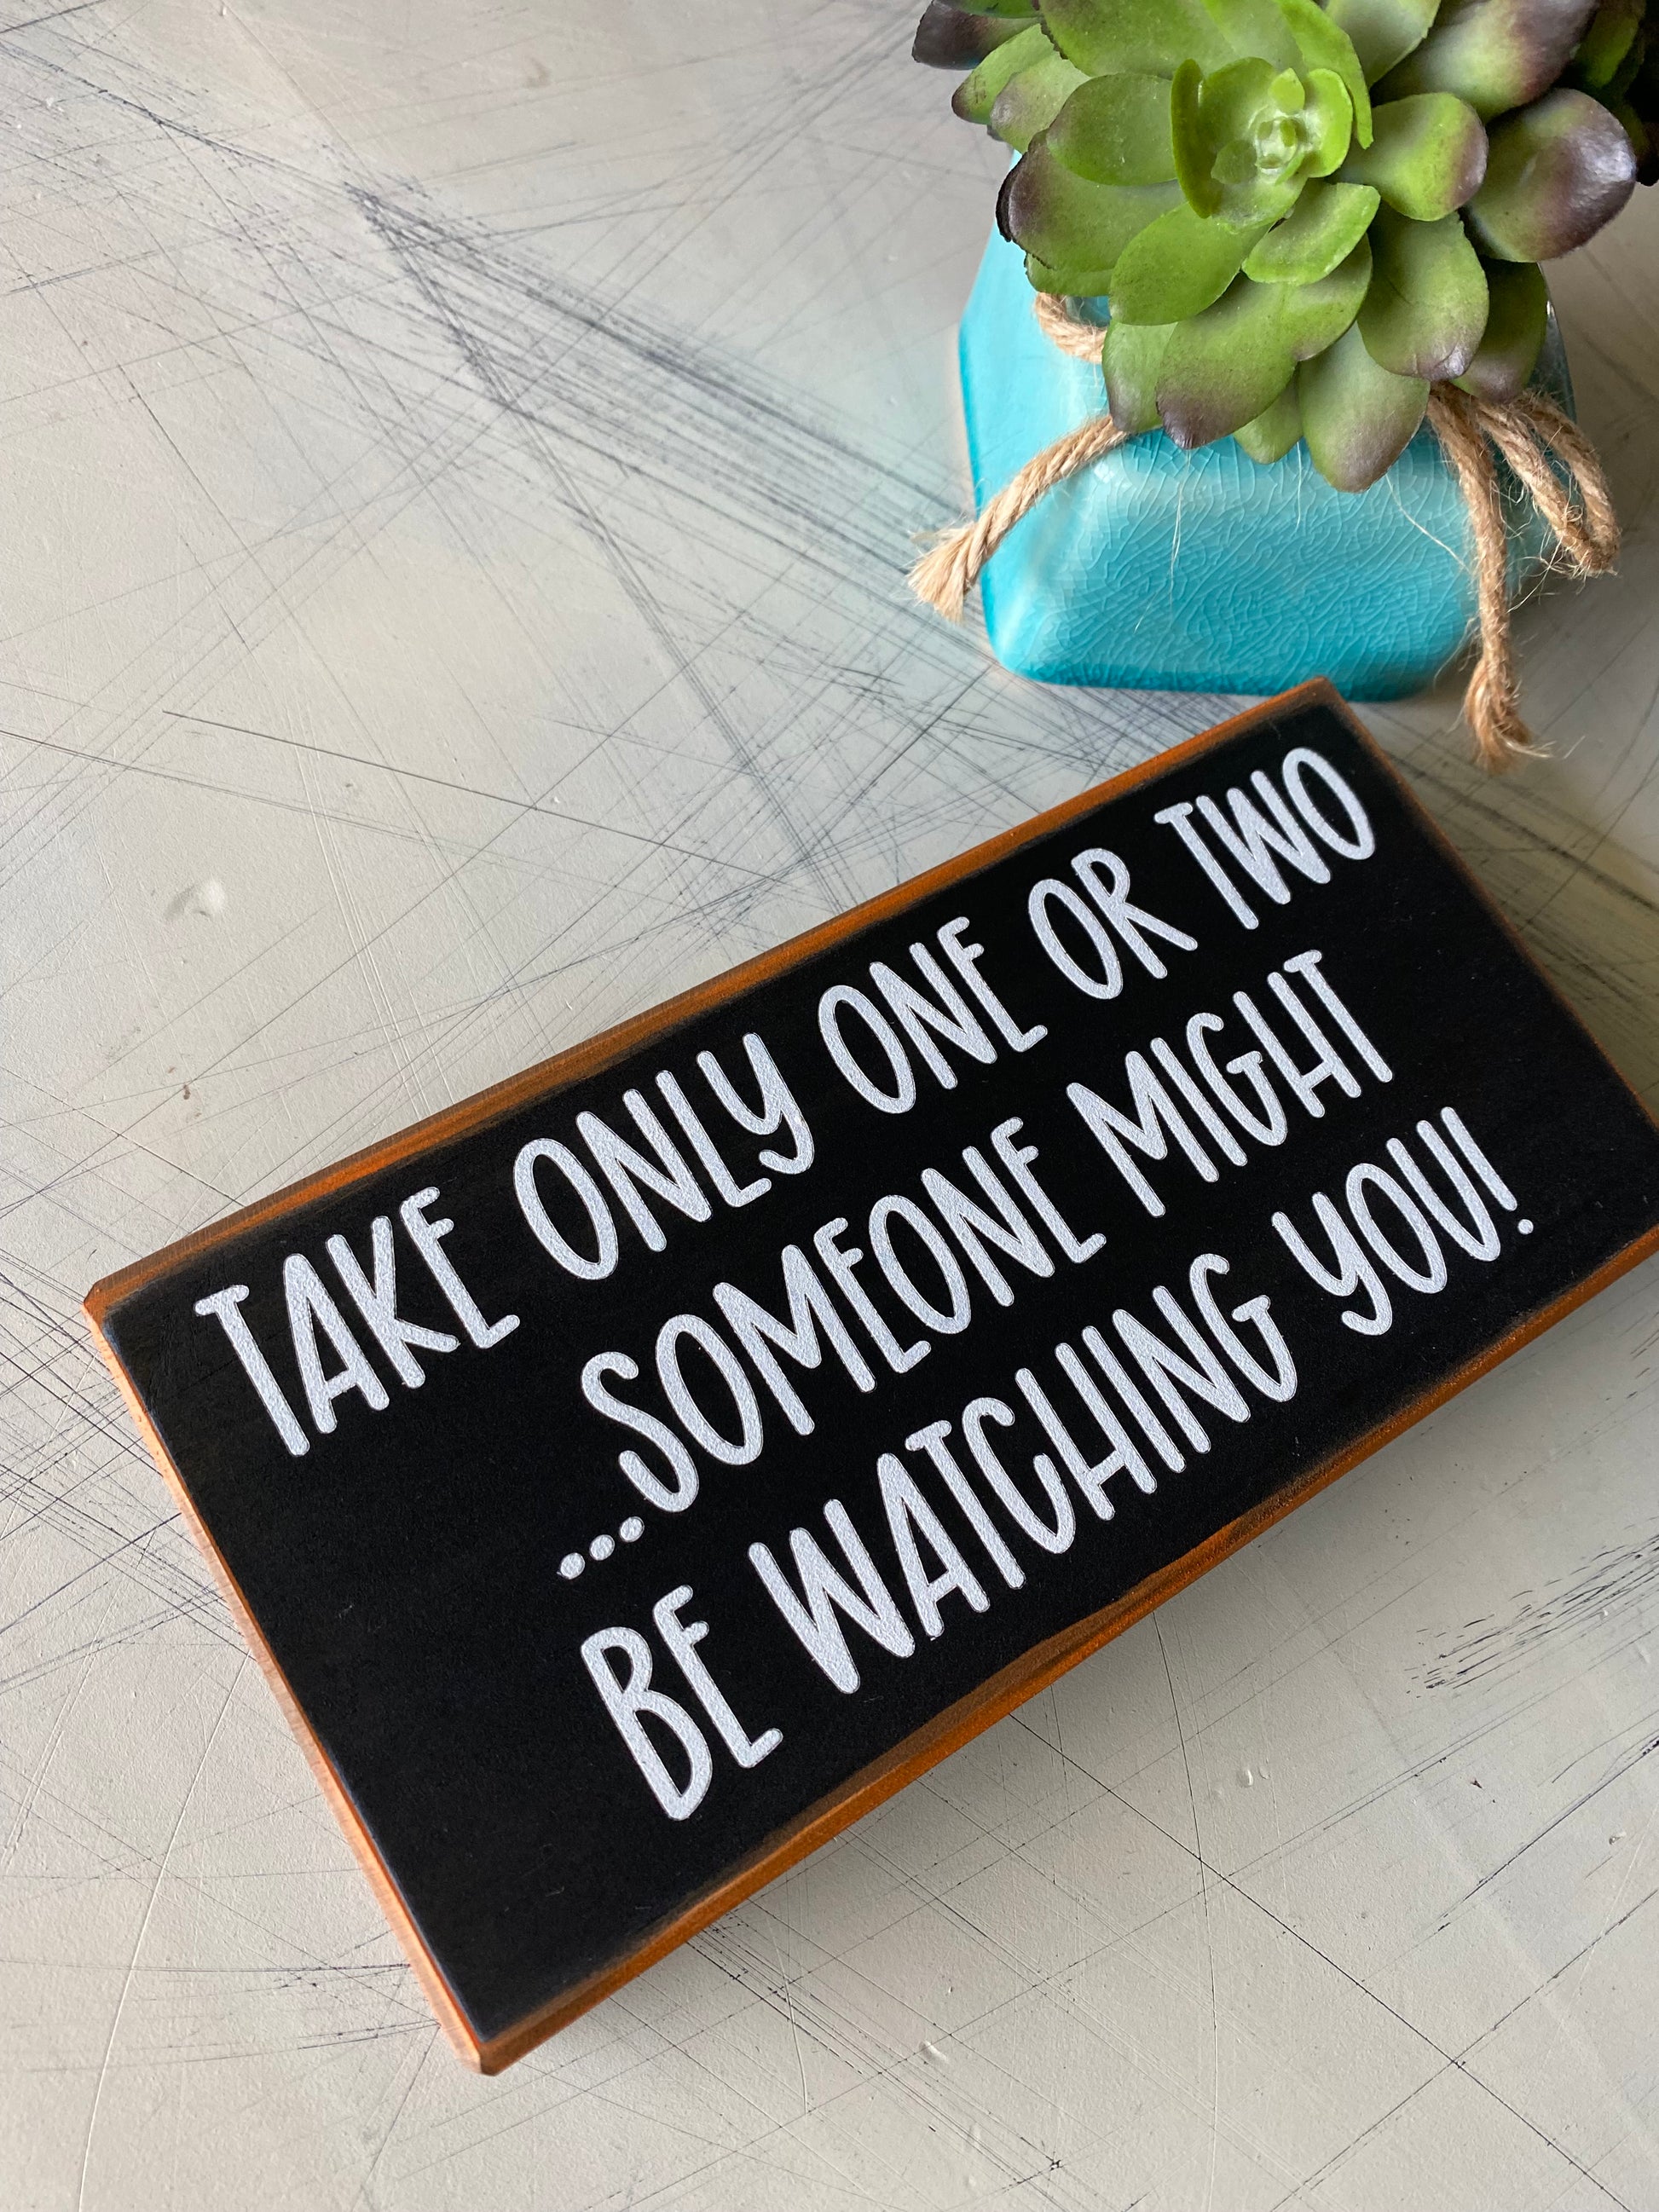 Take only one or two...someone might be watching you!  - Trick or Treat - handmade mini wood sign